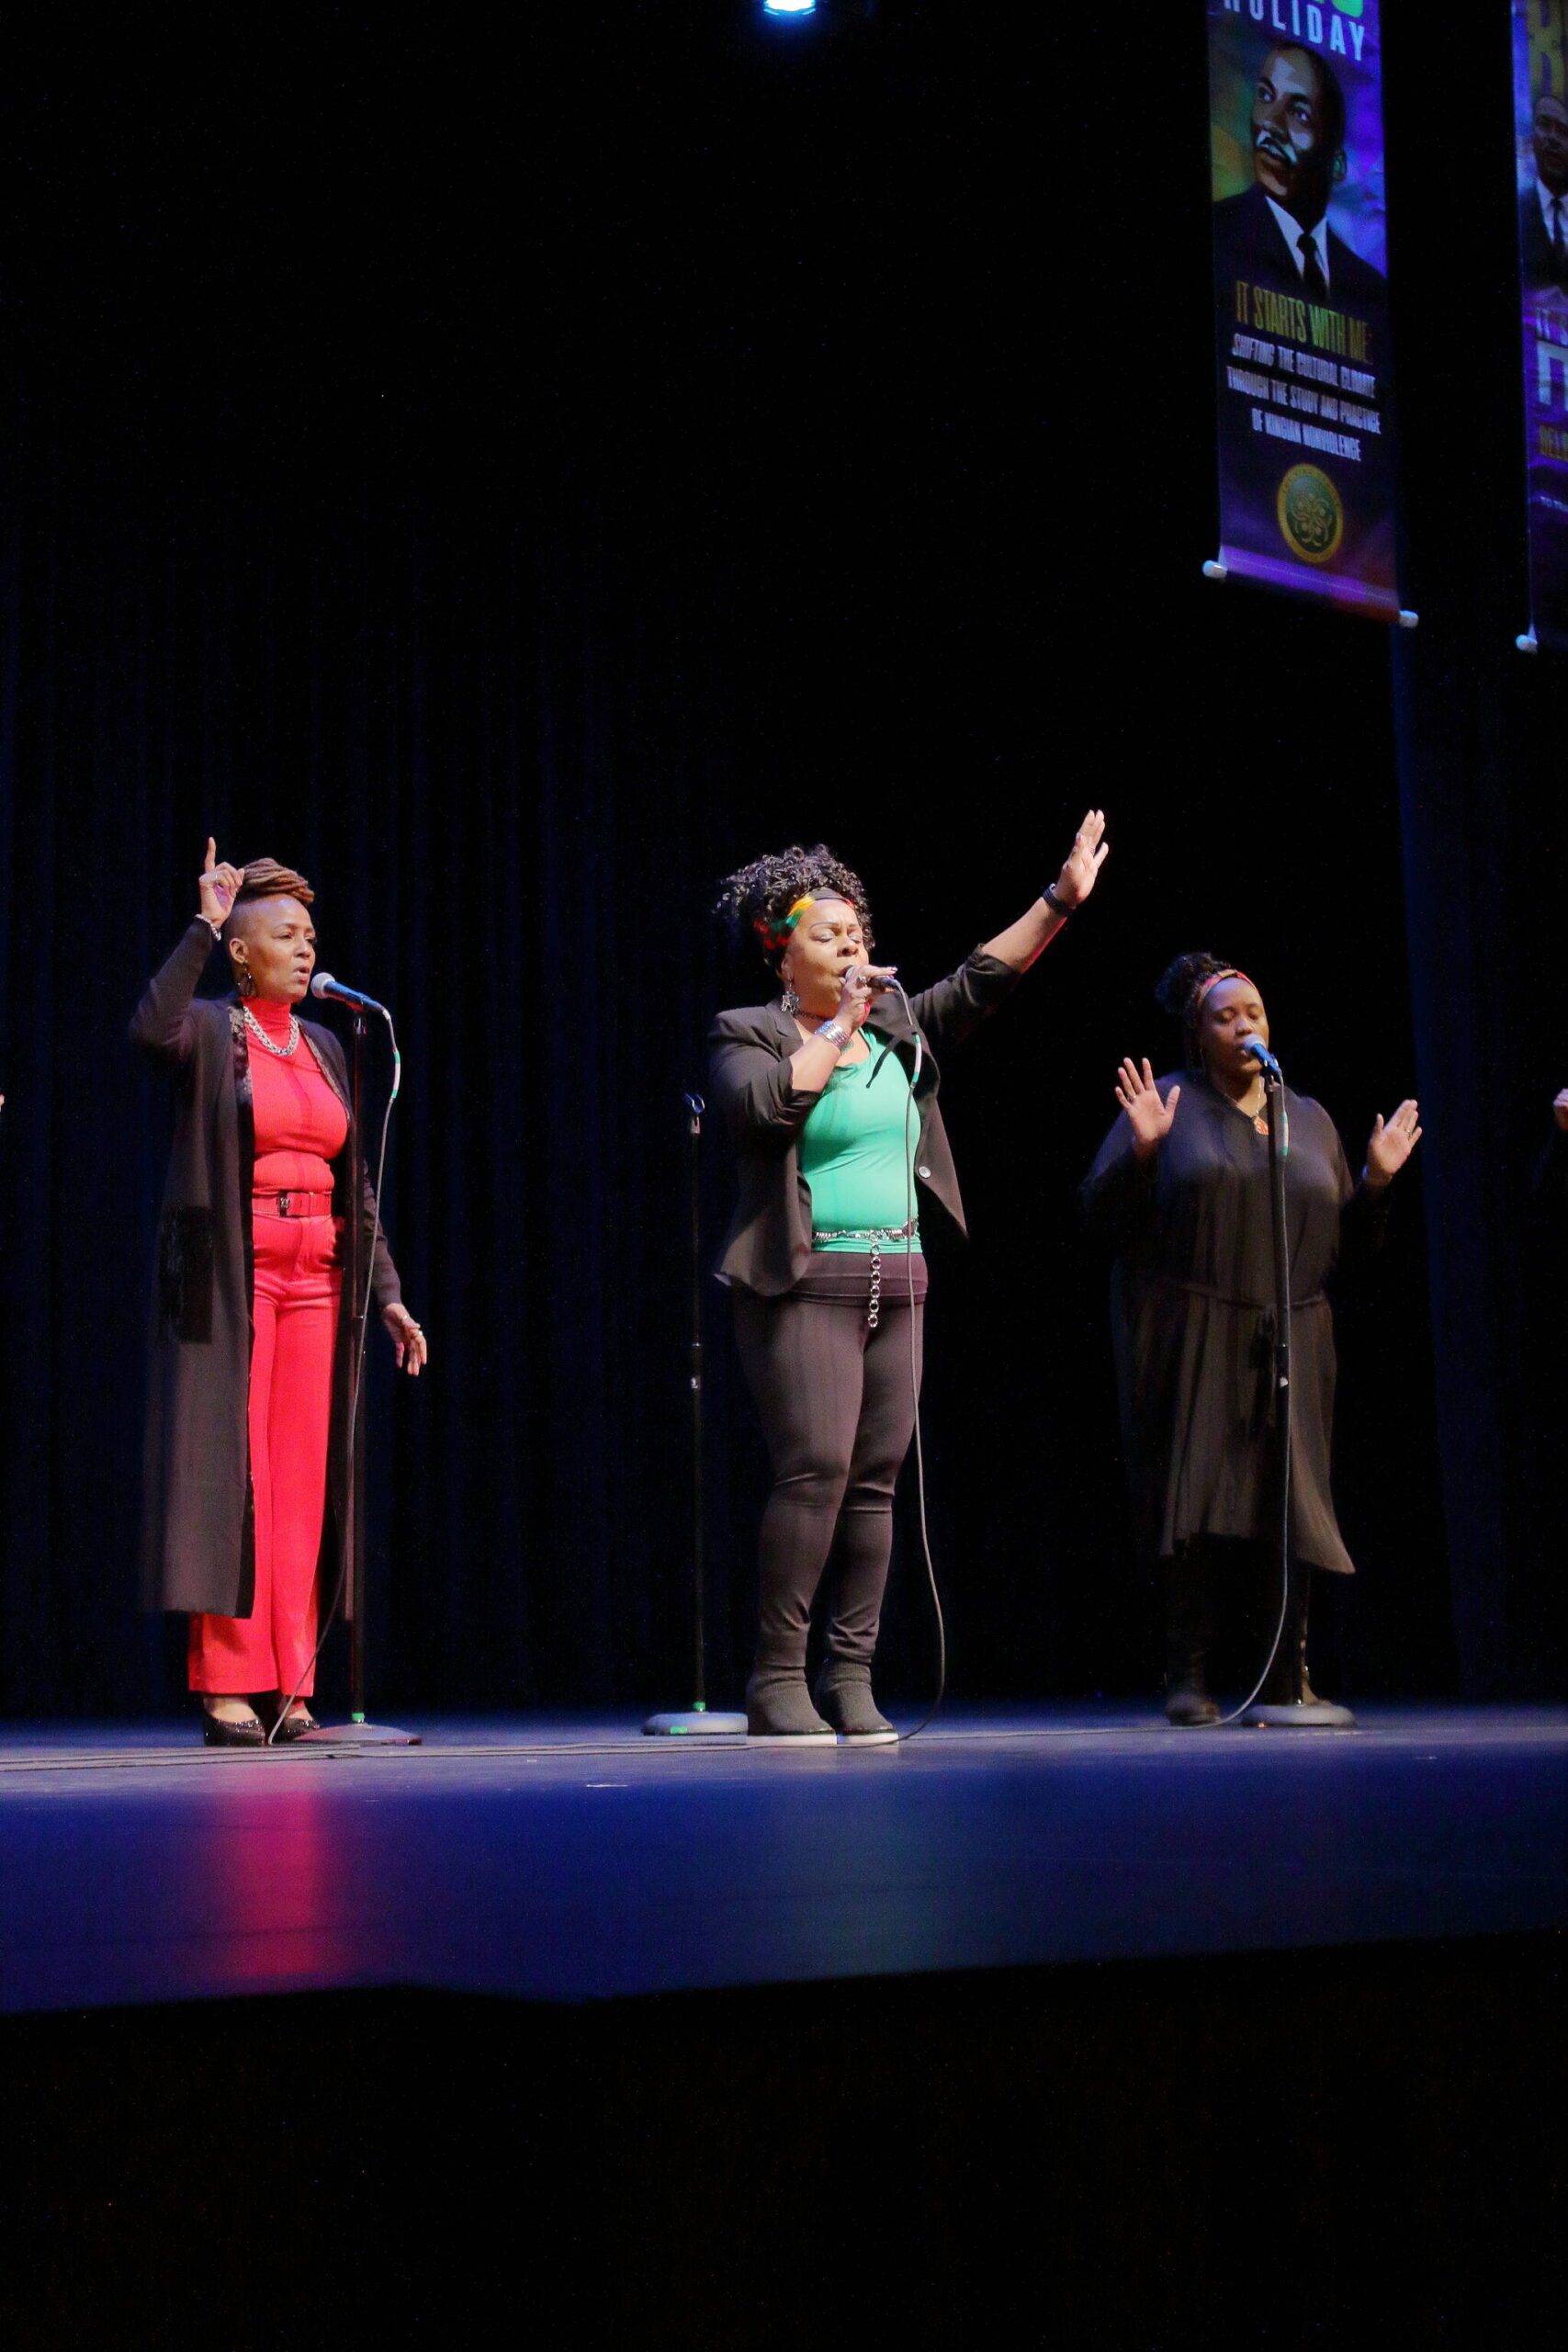 Photo by Keelin Everly-Lang / The Mirror.
A local gospel choir had the crowd on their feet shared song and praise at the MLK Day Celebration.